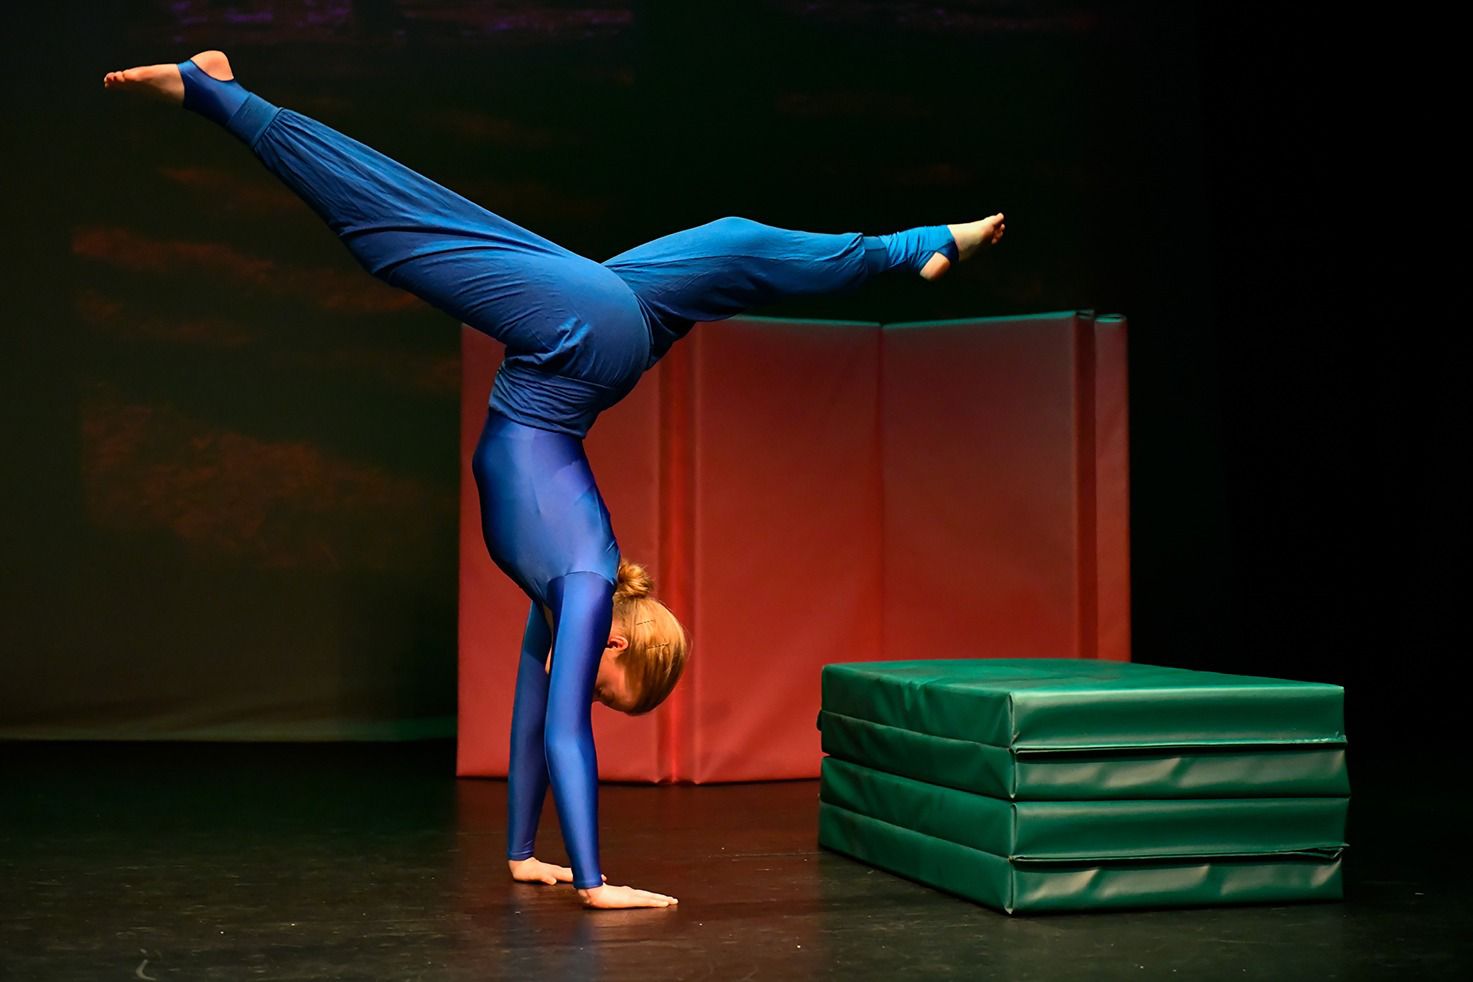 A teenage female student Acro ballet dance at Ruth Shine School of Dance performs dramatically on stage, she is in a hand-stand position with her legs split front to back and she is wearing a blue outfit with long sleeve